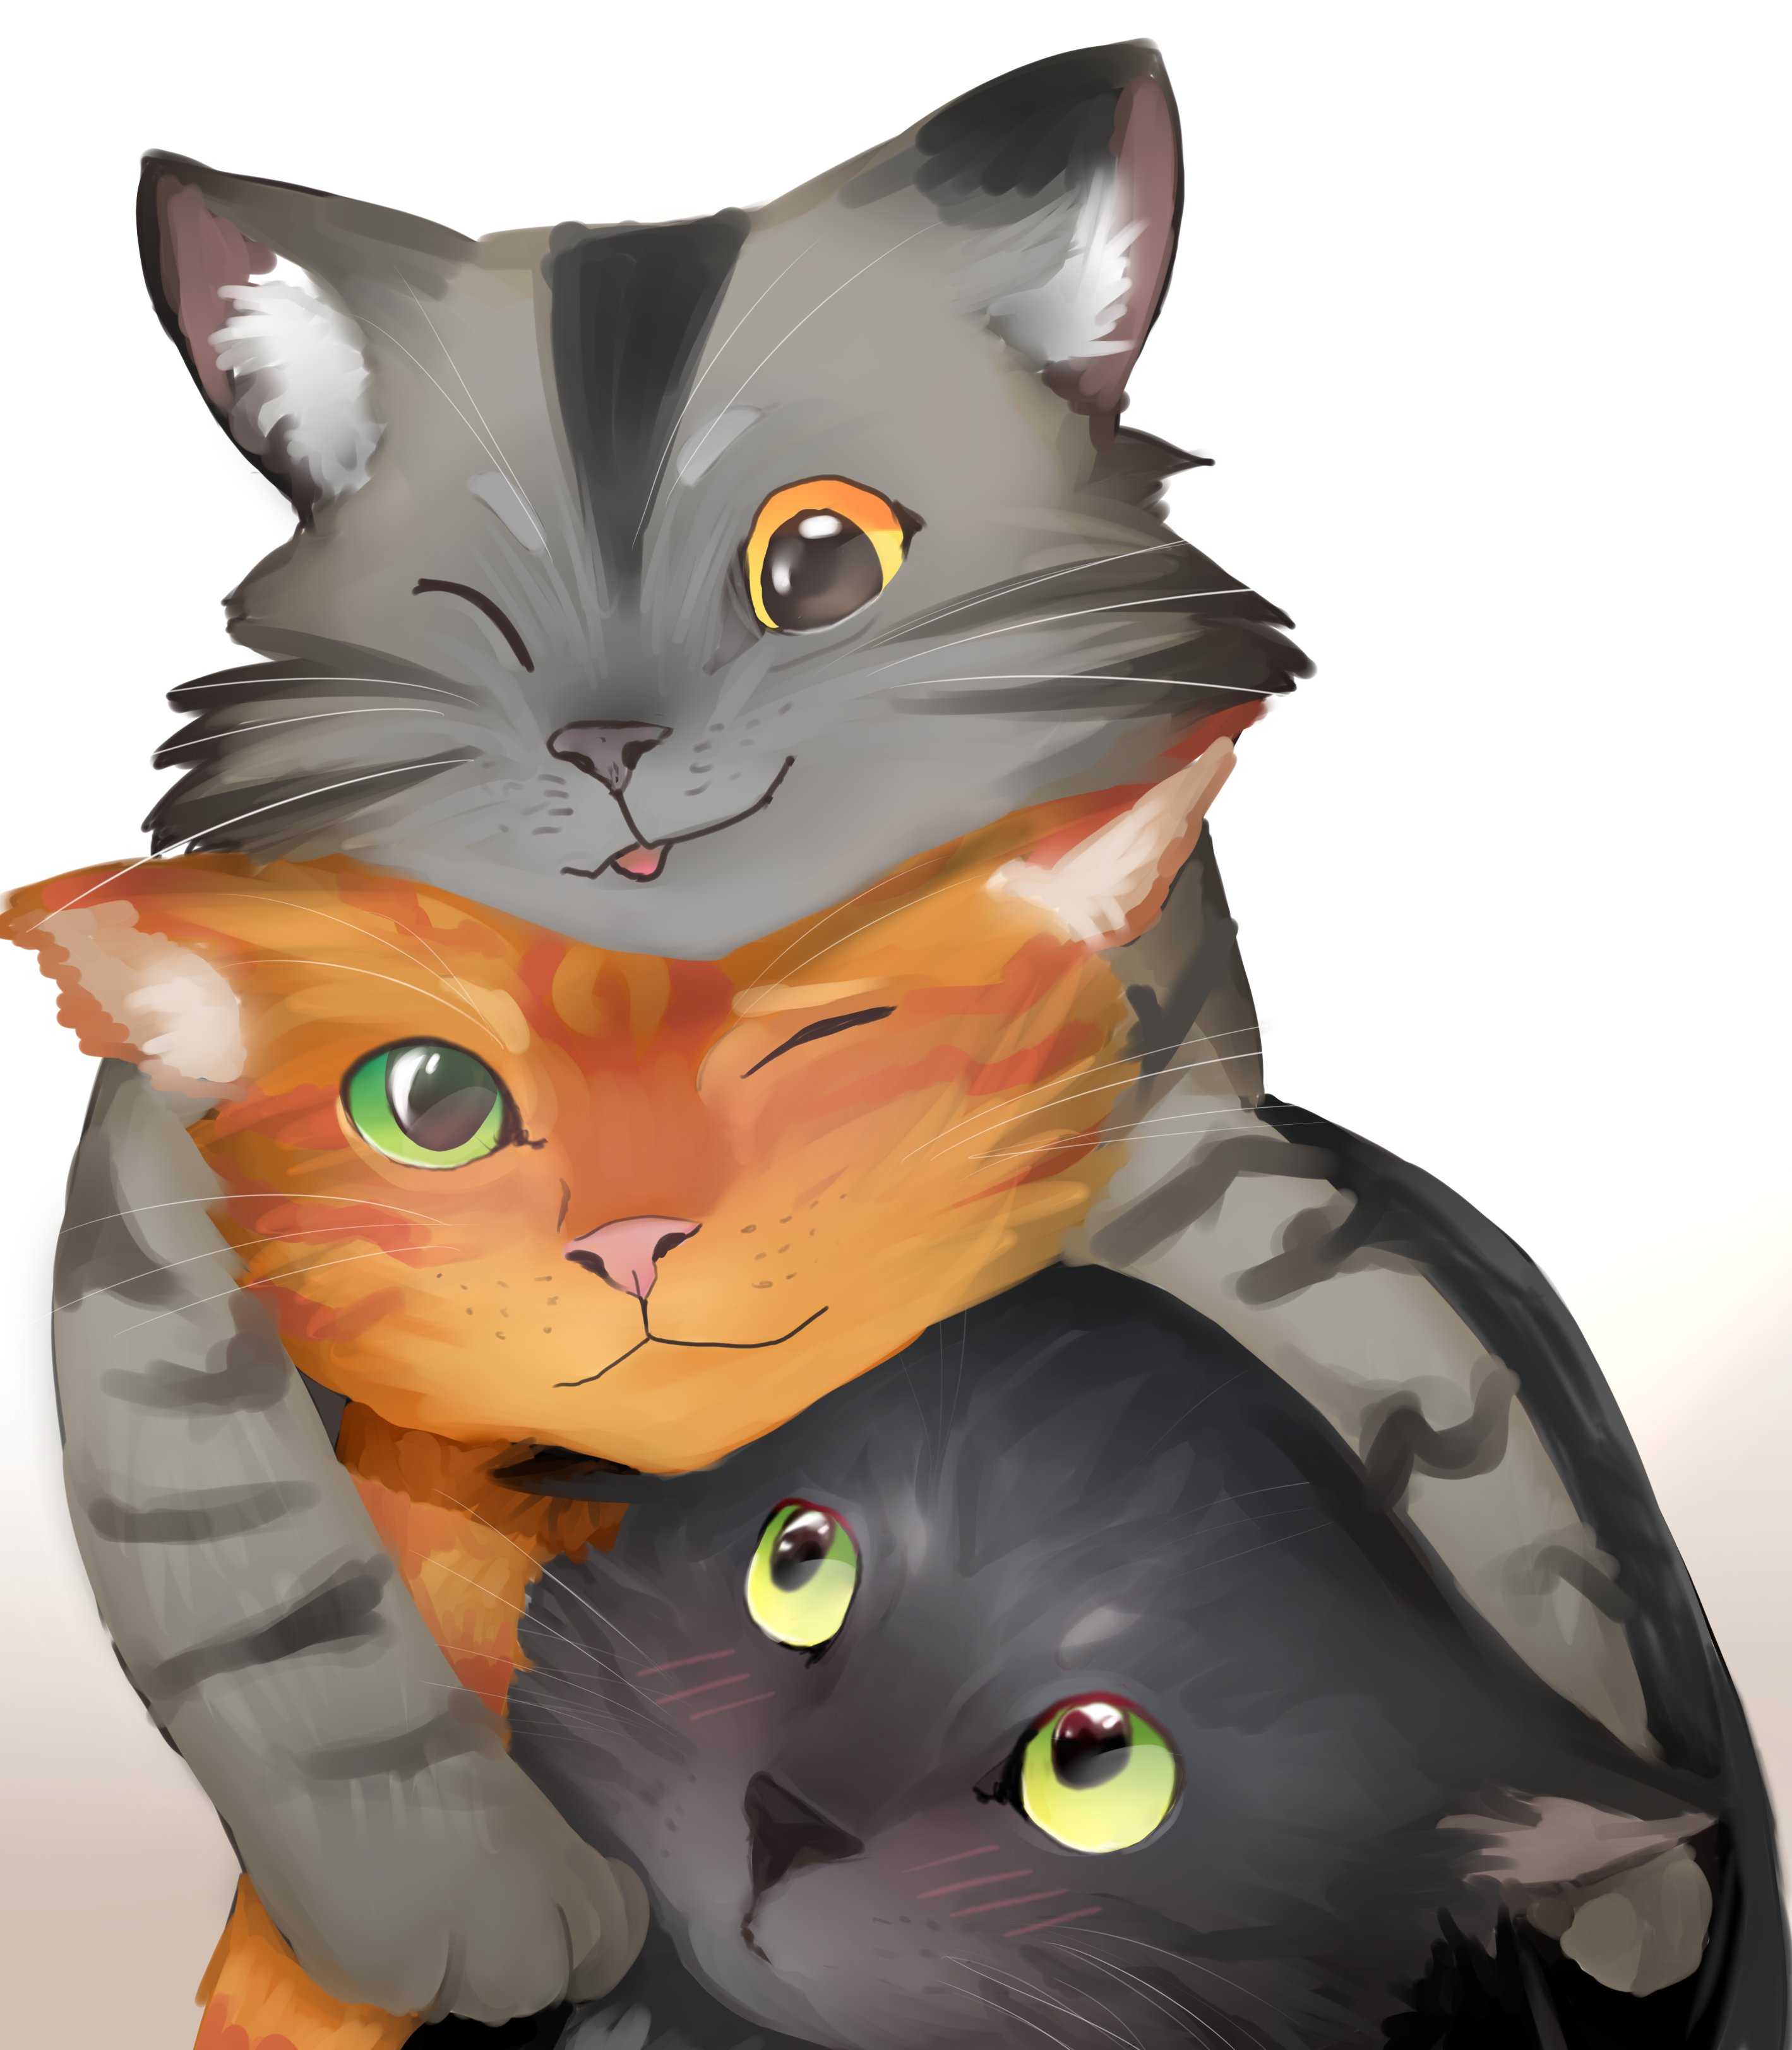 Firestar and Ravenpaw sitting next to each other